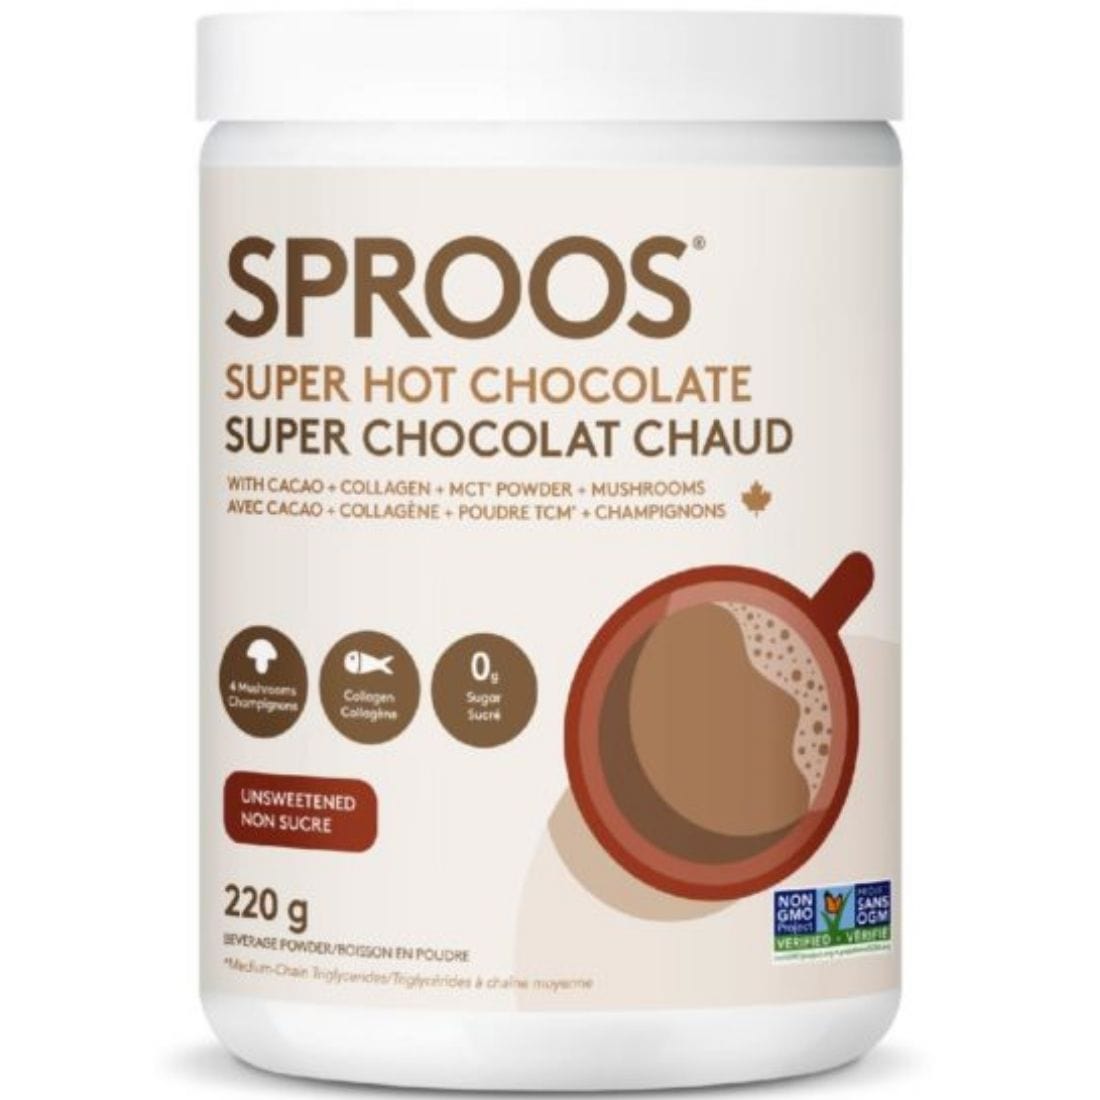 Sproos Super Hot Chocolate, 220 g